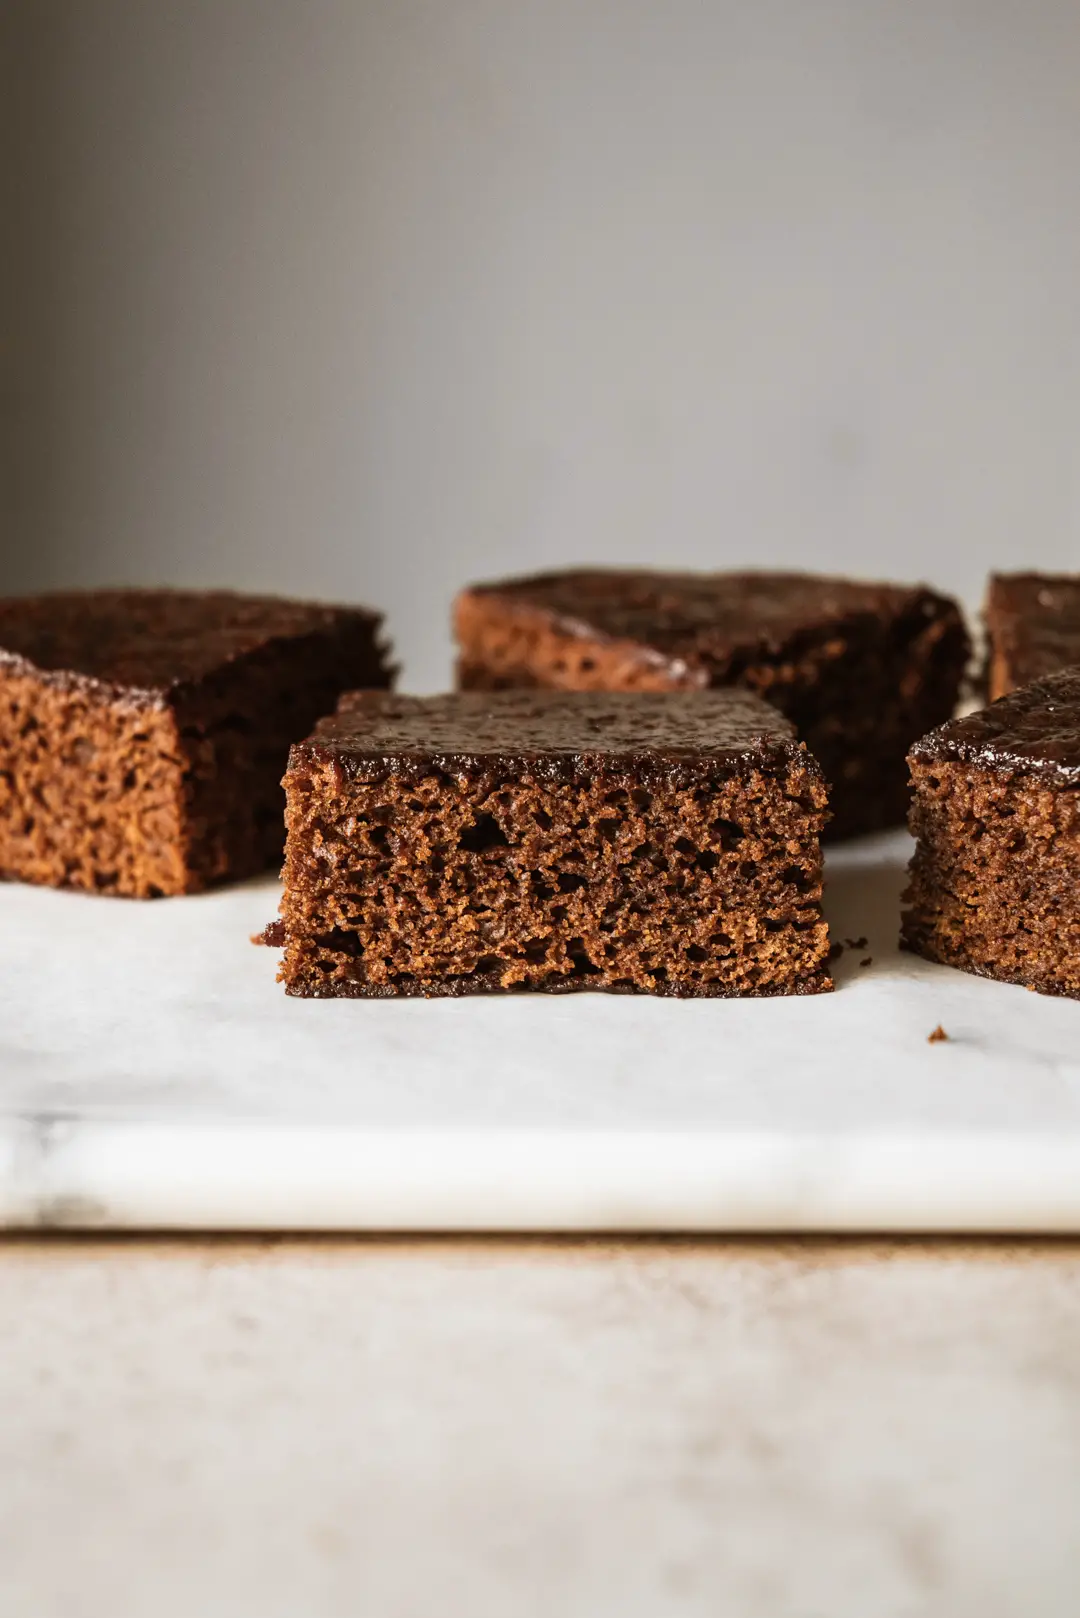 This sticky gingerbread spice cake features warm flavors with a sticky exterior that yields to a tender crumb